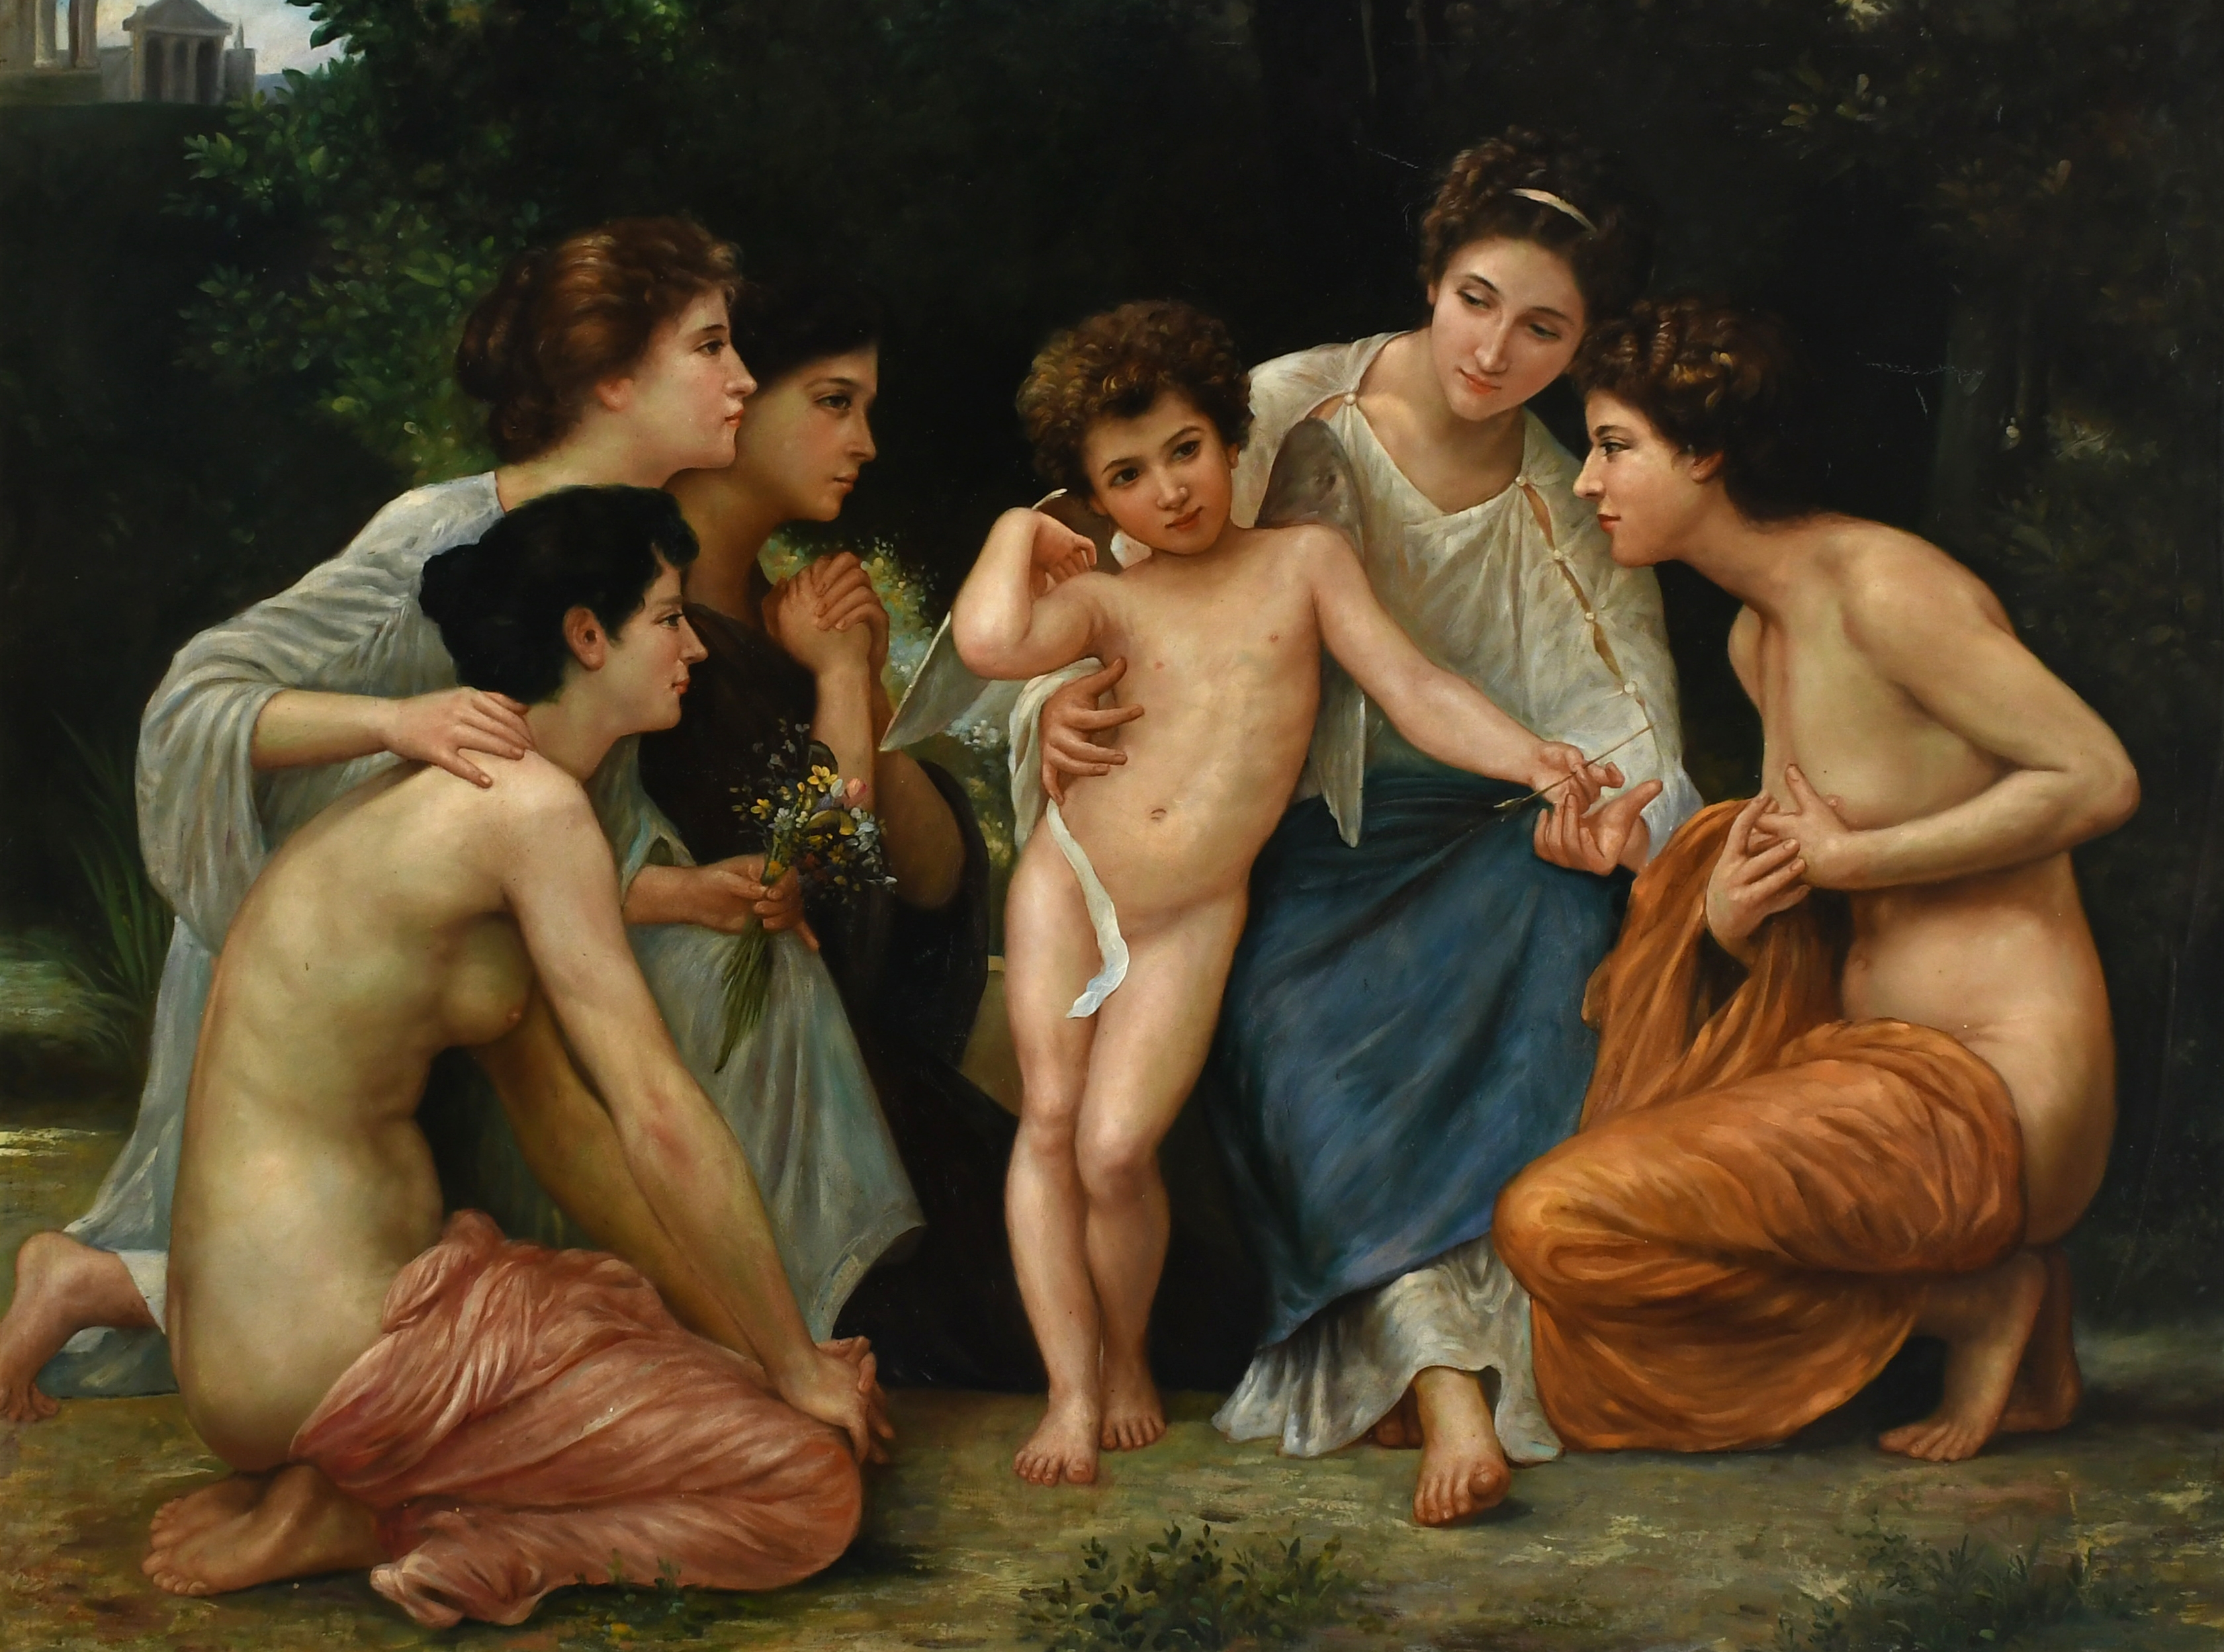 Artwork by William Adolphe Bouguereau, L'admiration, Made of Oil on canvas